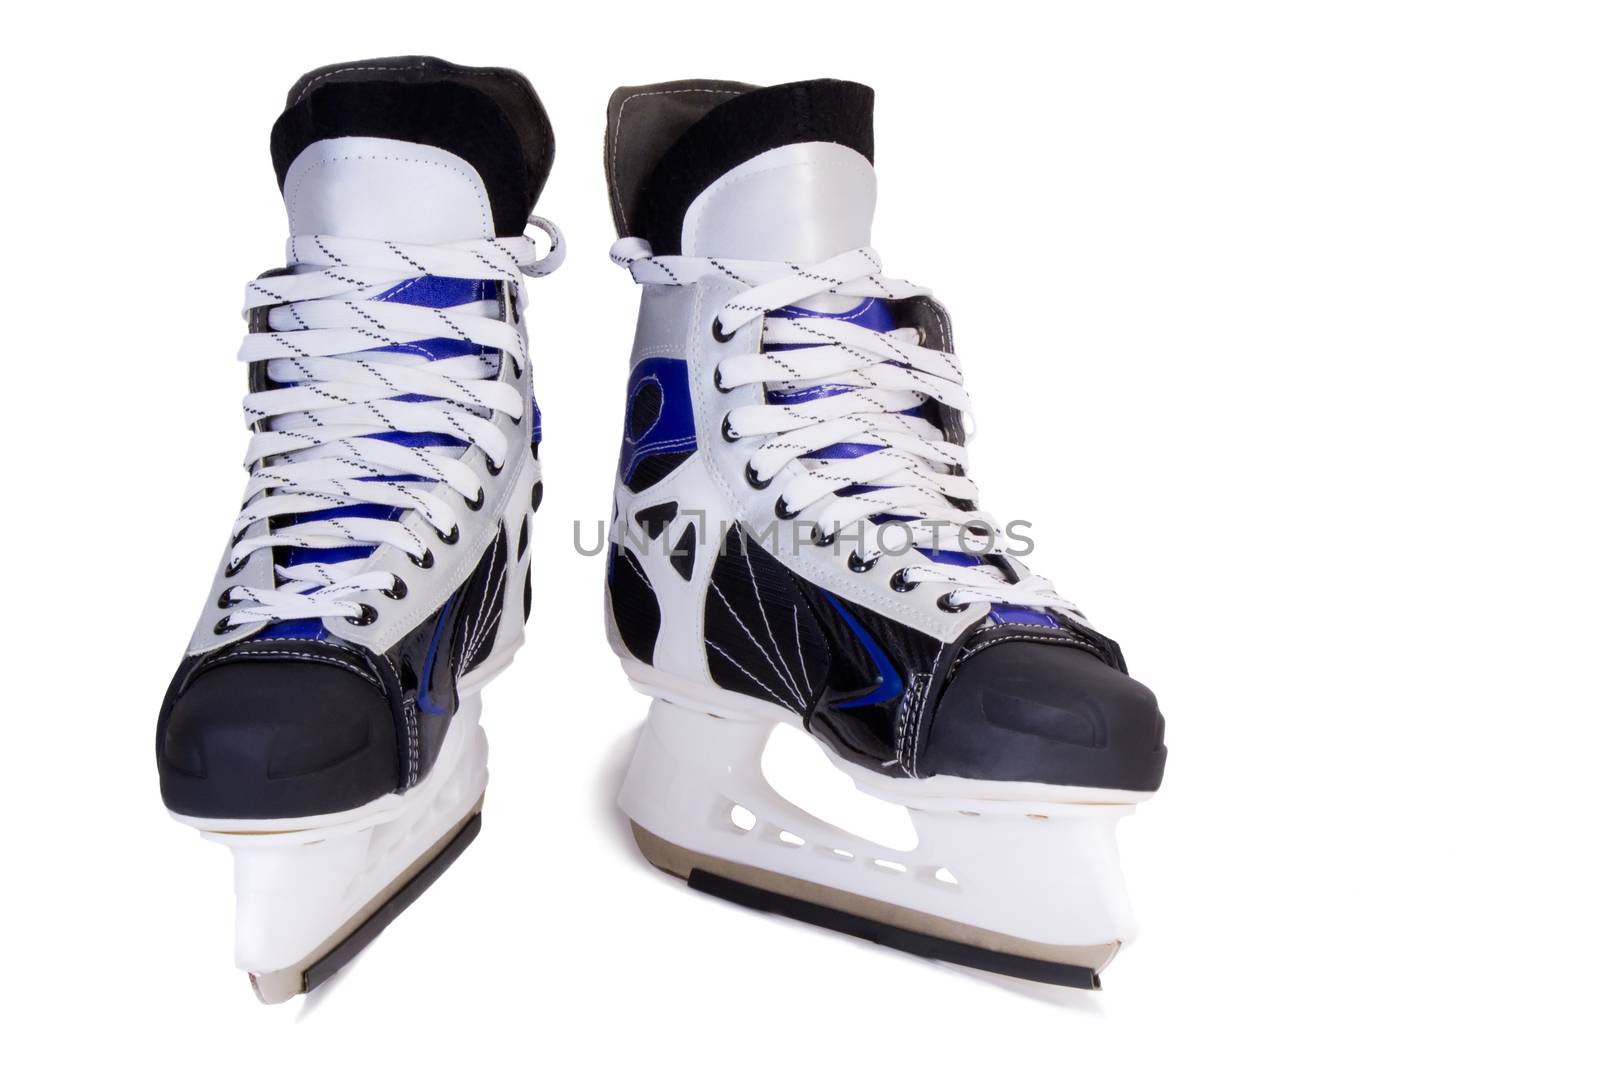 Comfortable and beautiful men's skating boots. Presented on a white background.
